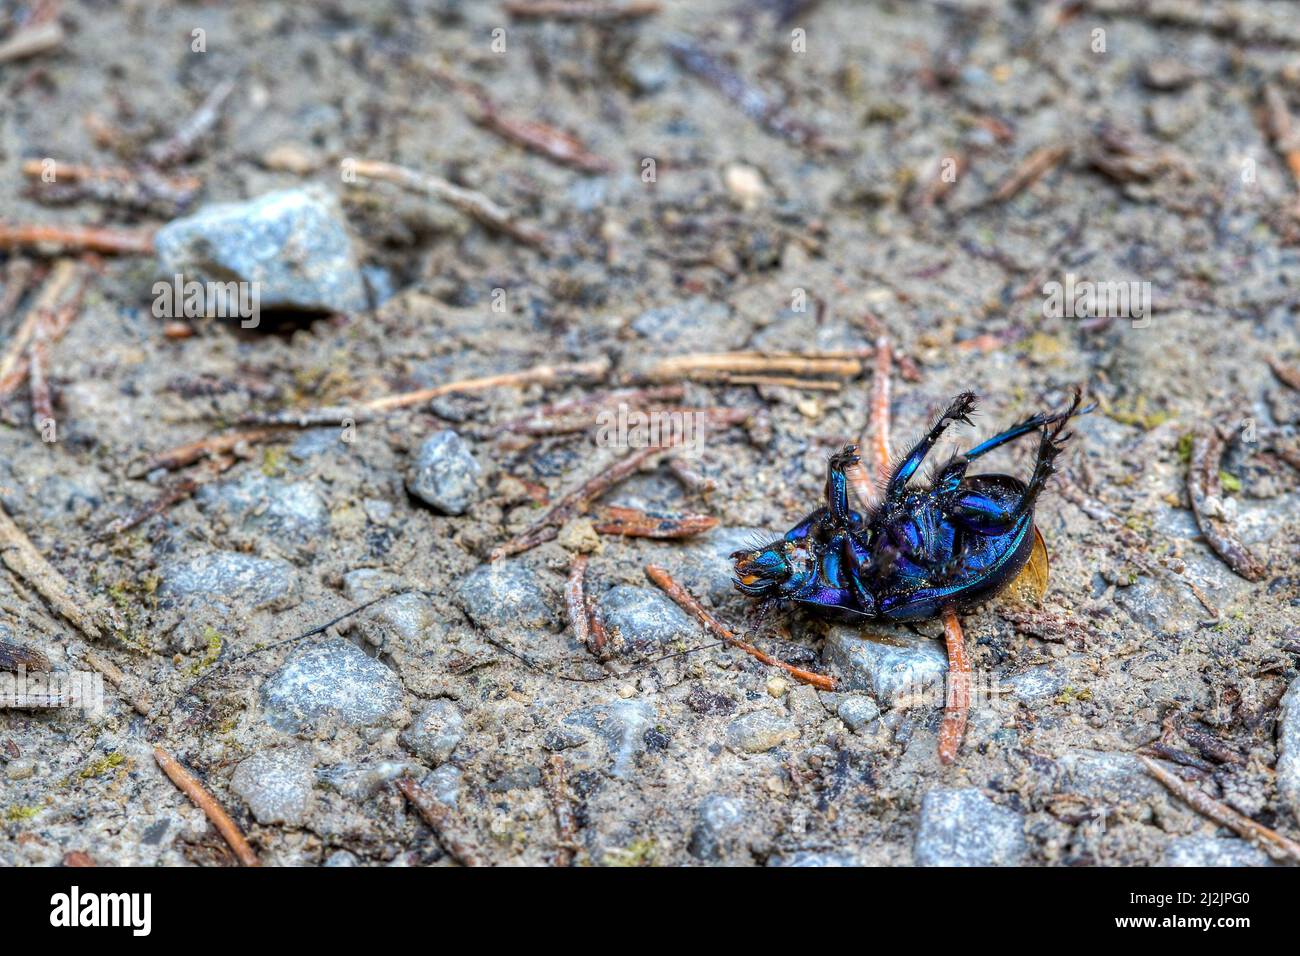 If you fall on your back on stony paths, it is difficult to get back on your feet. Blue metallic shiny beetle on gravel road lies on the back. Stock Photo